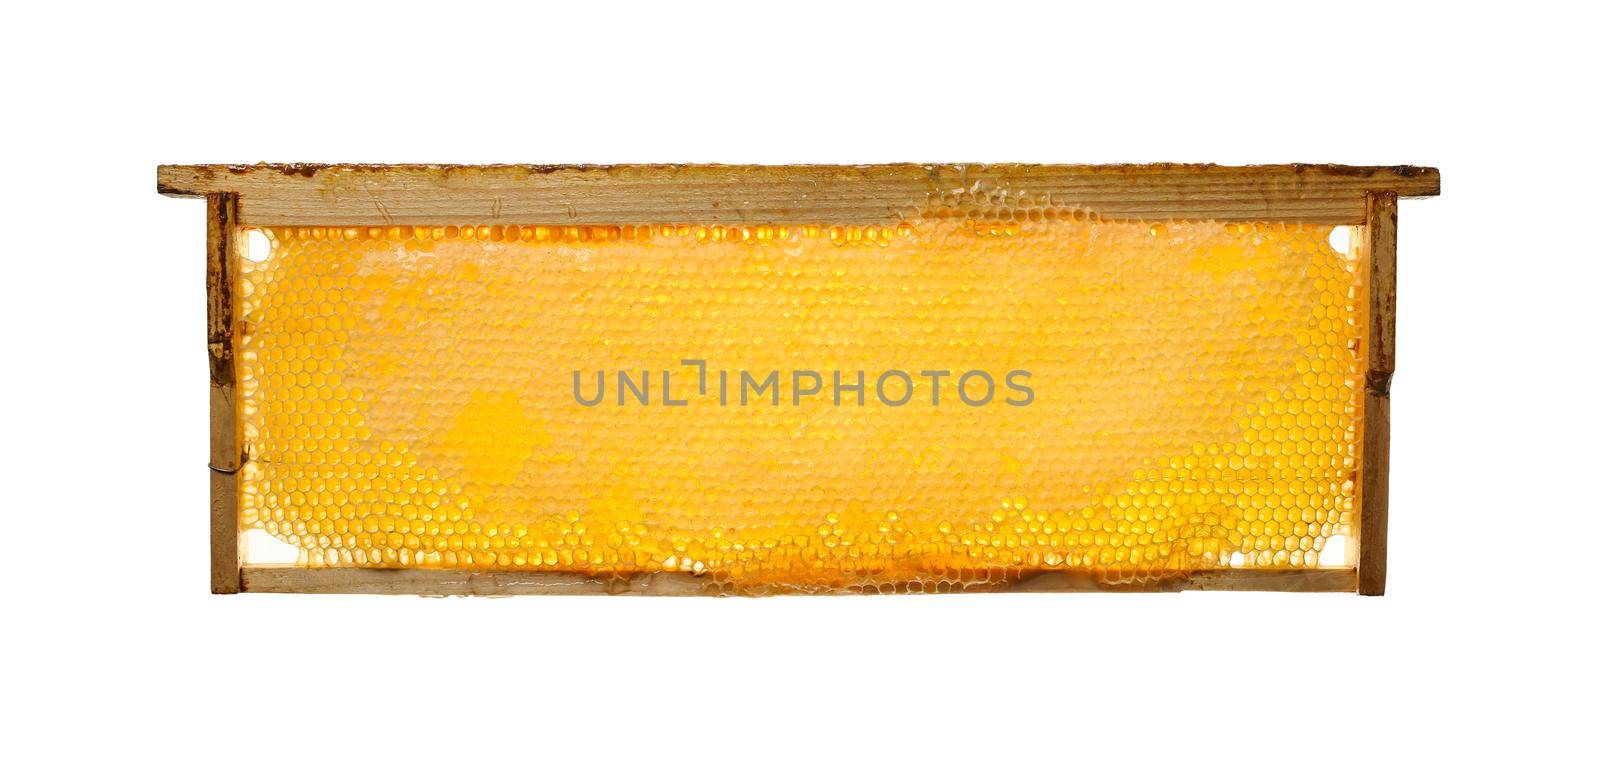 Close up fresh golden comb honey wooden frame isolated on white background, side view